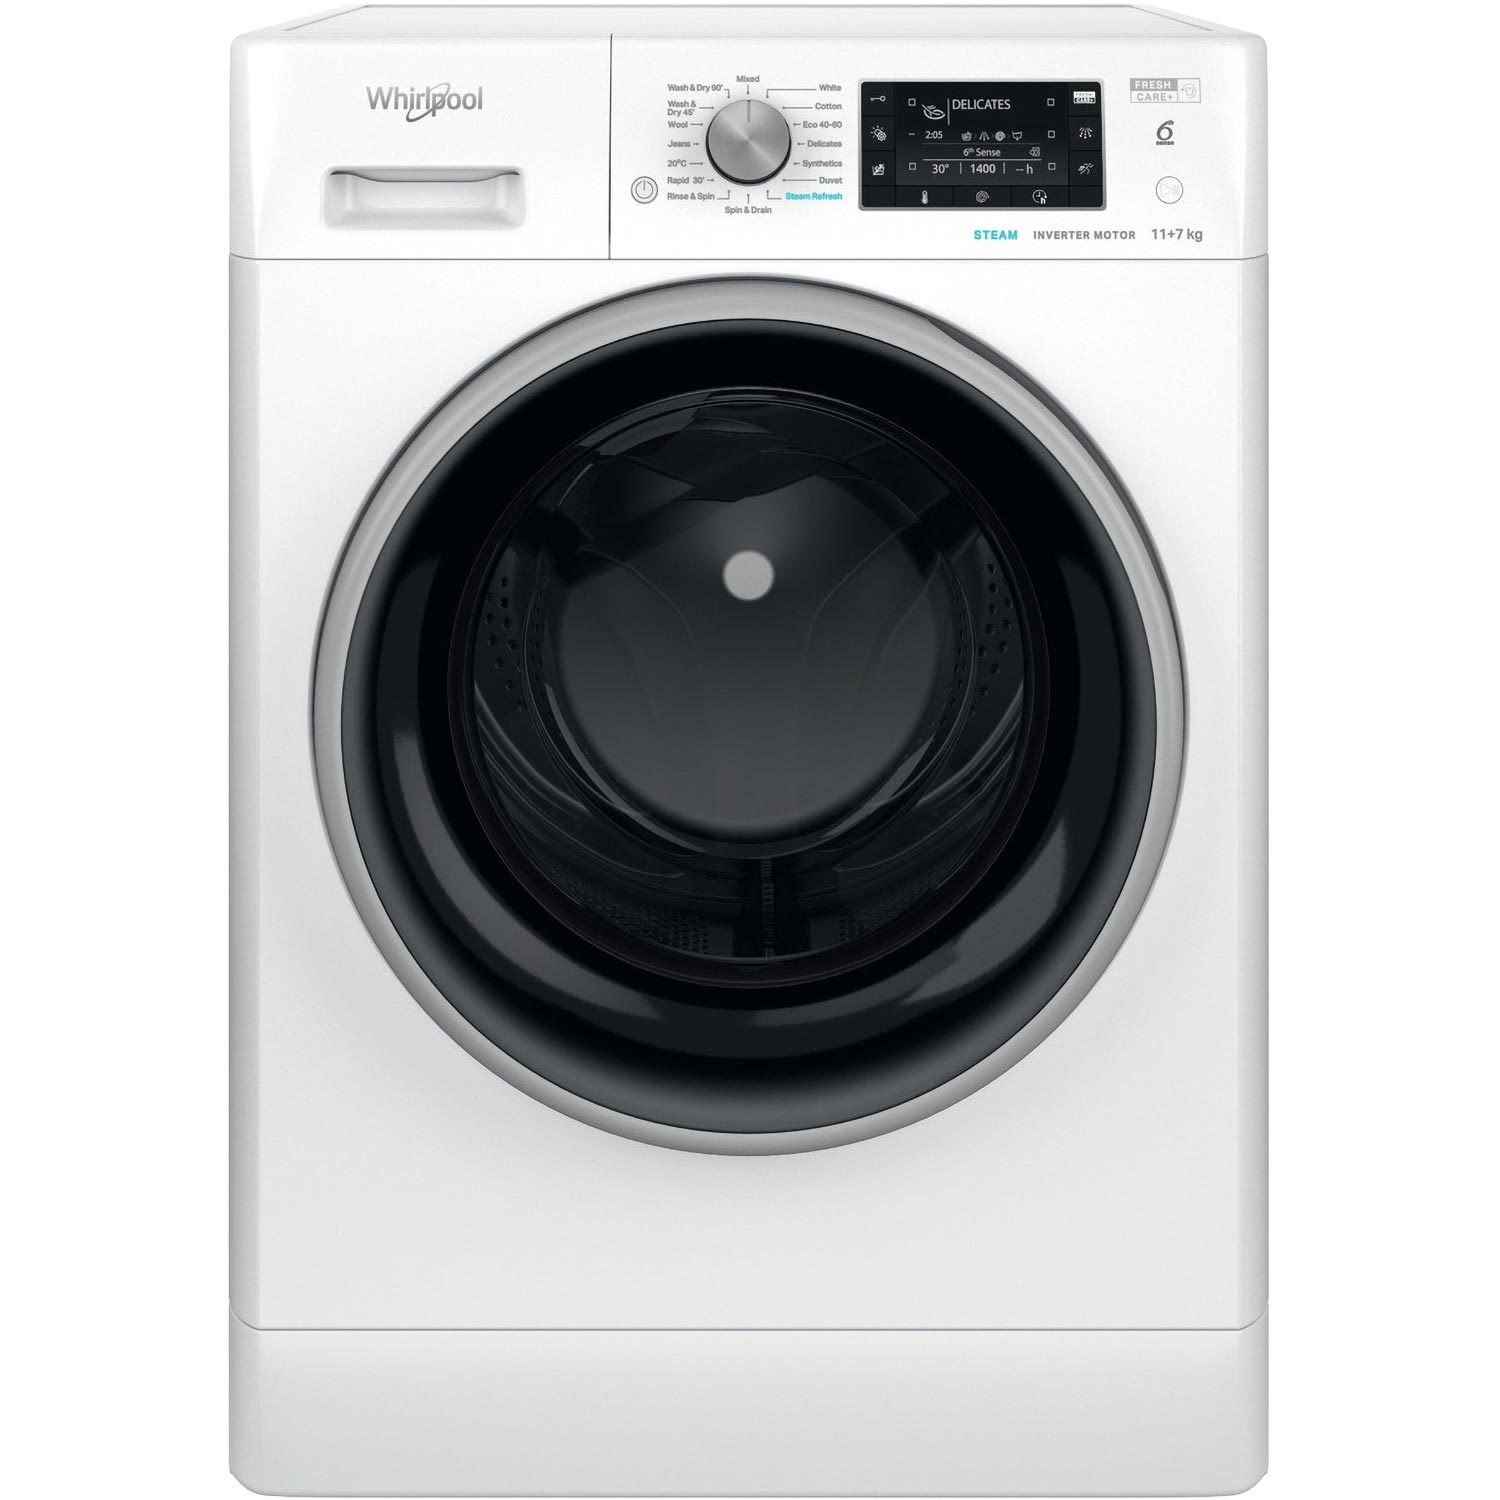 Photos - Other for Computer Whirlpool 6th sense 11kg Wash 7kg Dry 1400rpm Washer Dryer - White FFWDD11 